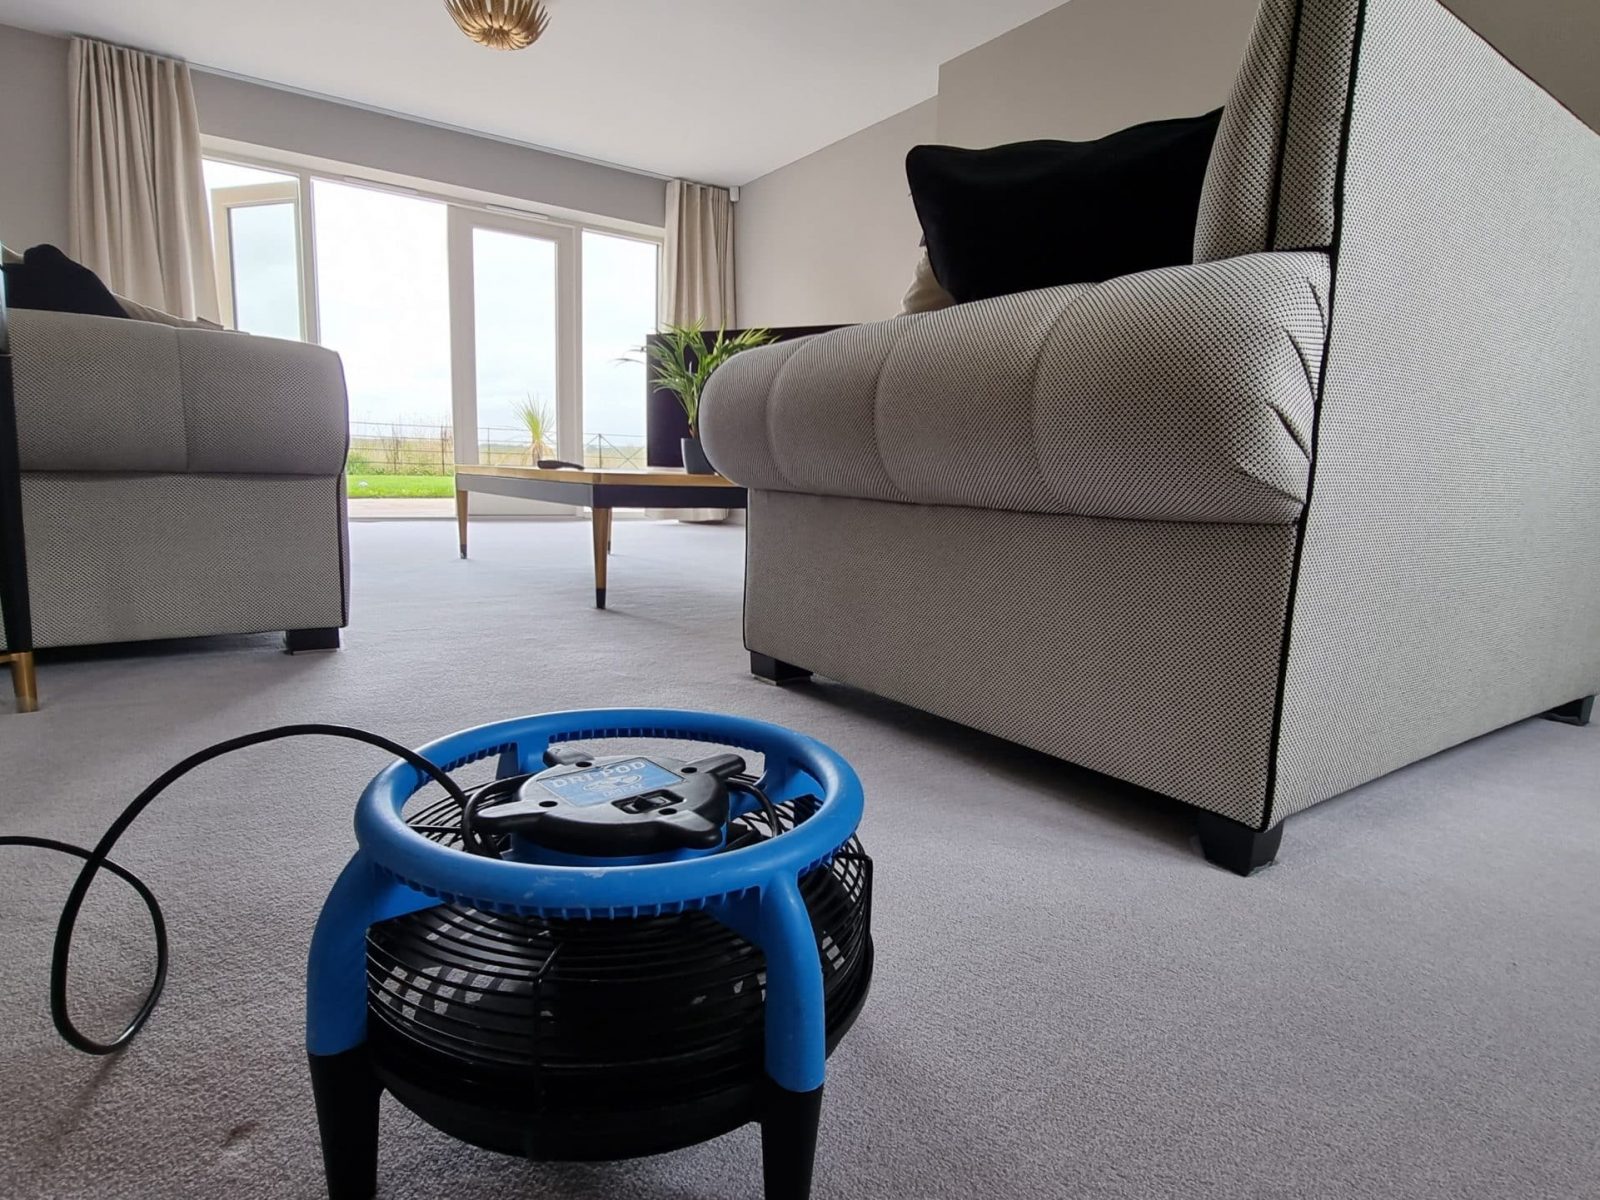 carpet driers speed drying